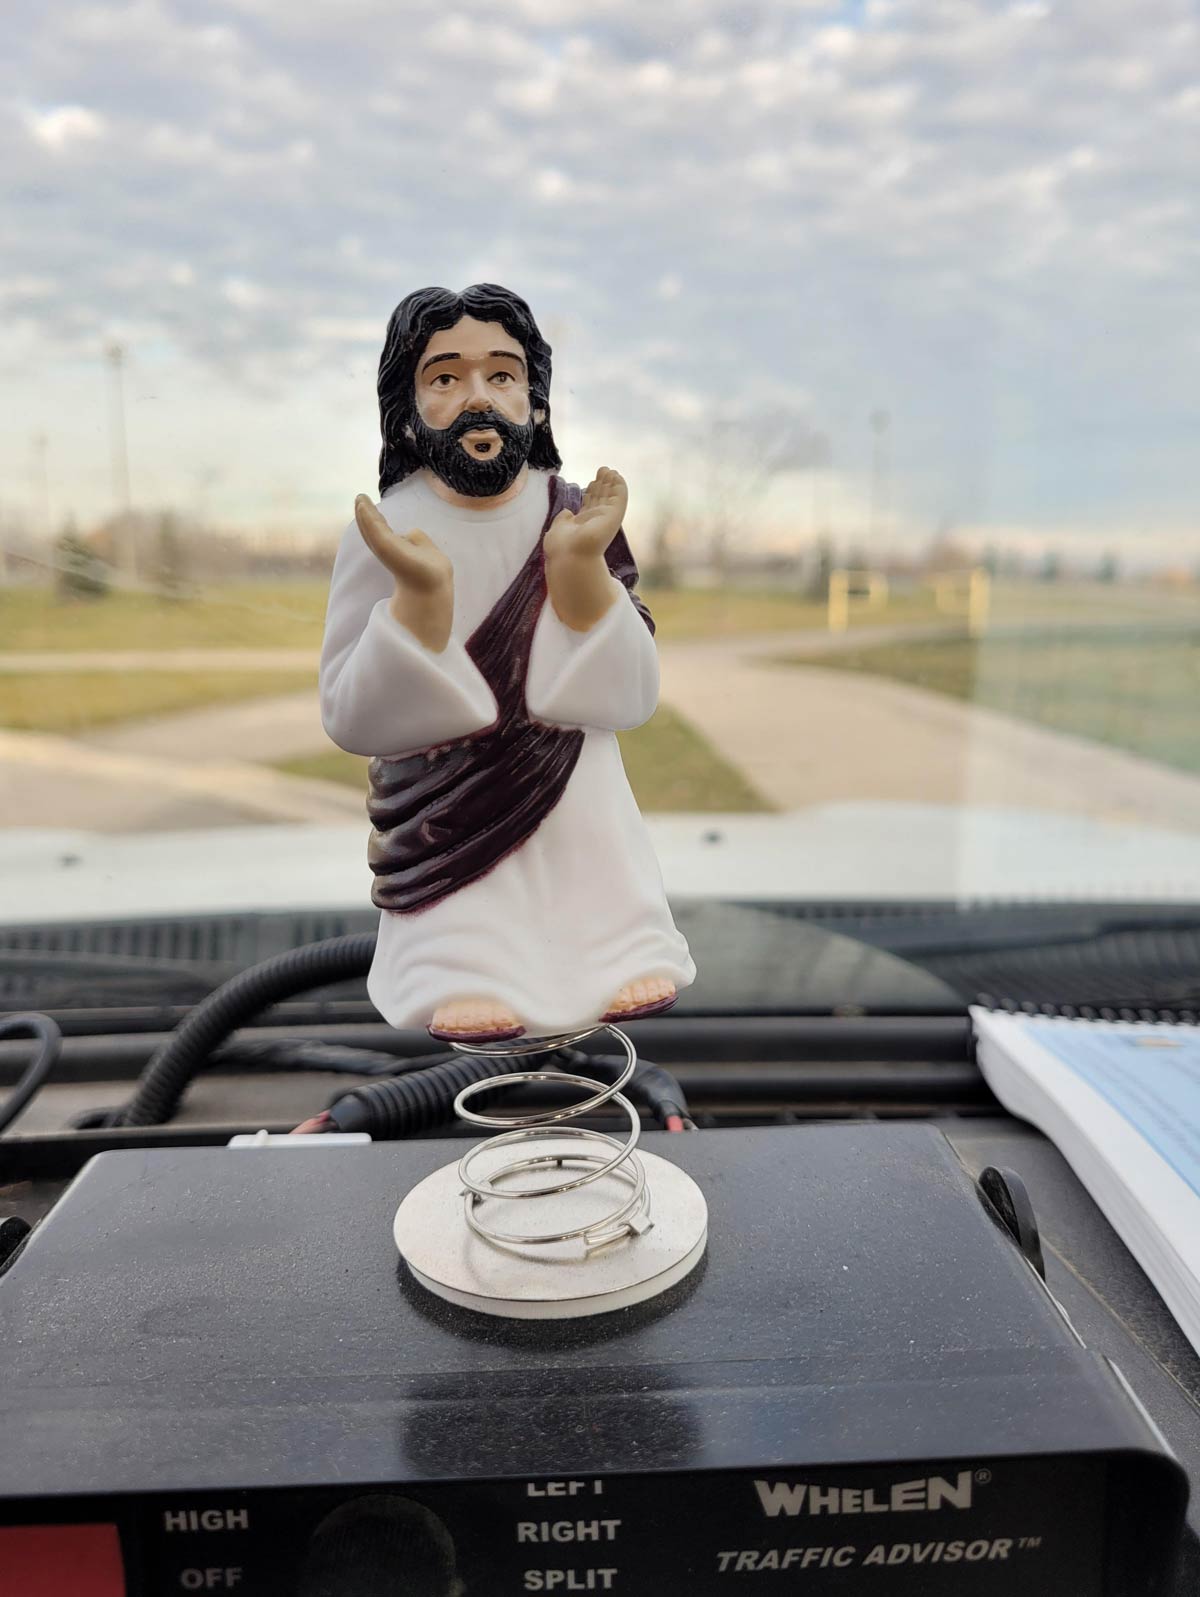 Bobble-Jesus doesn't know how to fix your problems..